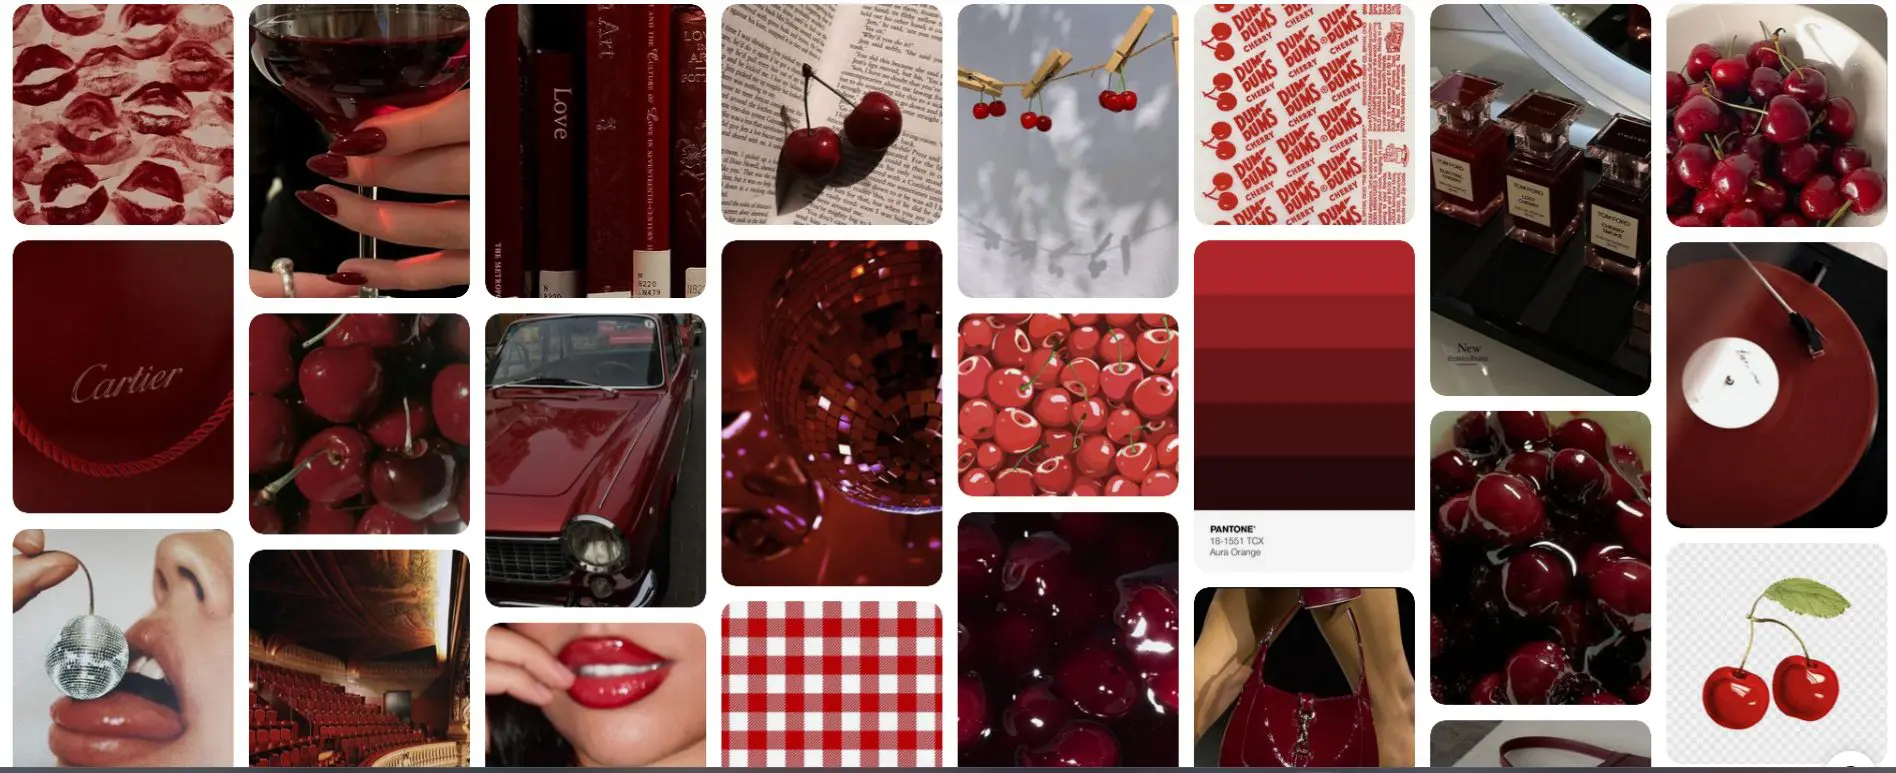 What is Cherry Red? The Color Taking Over Social Media